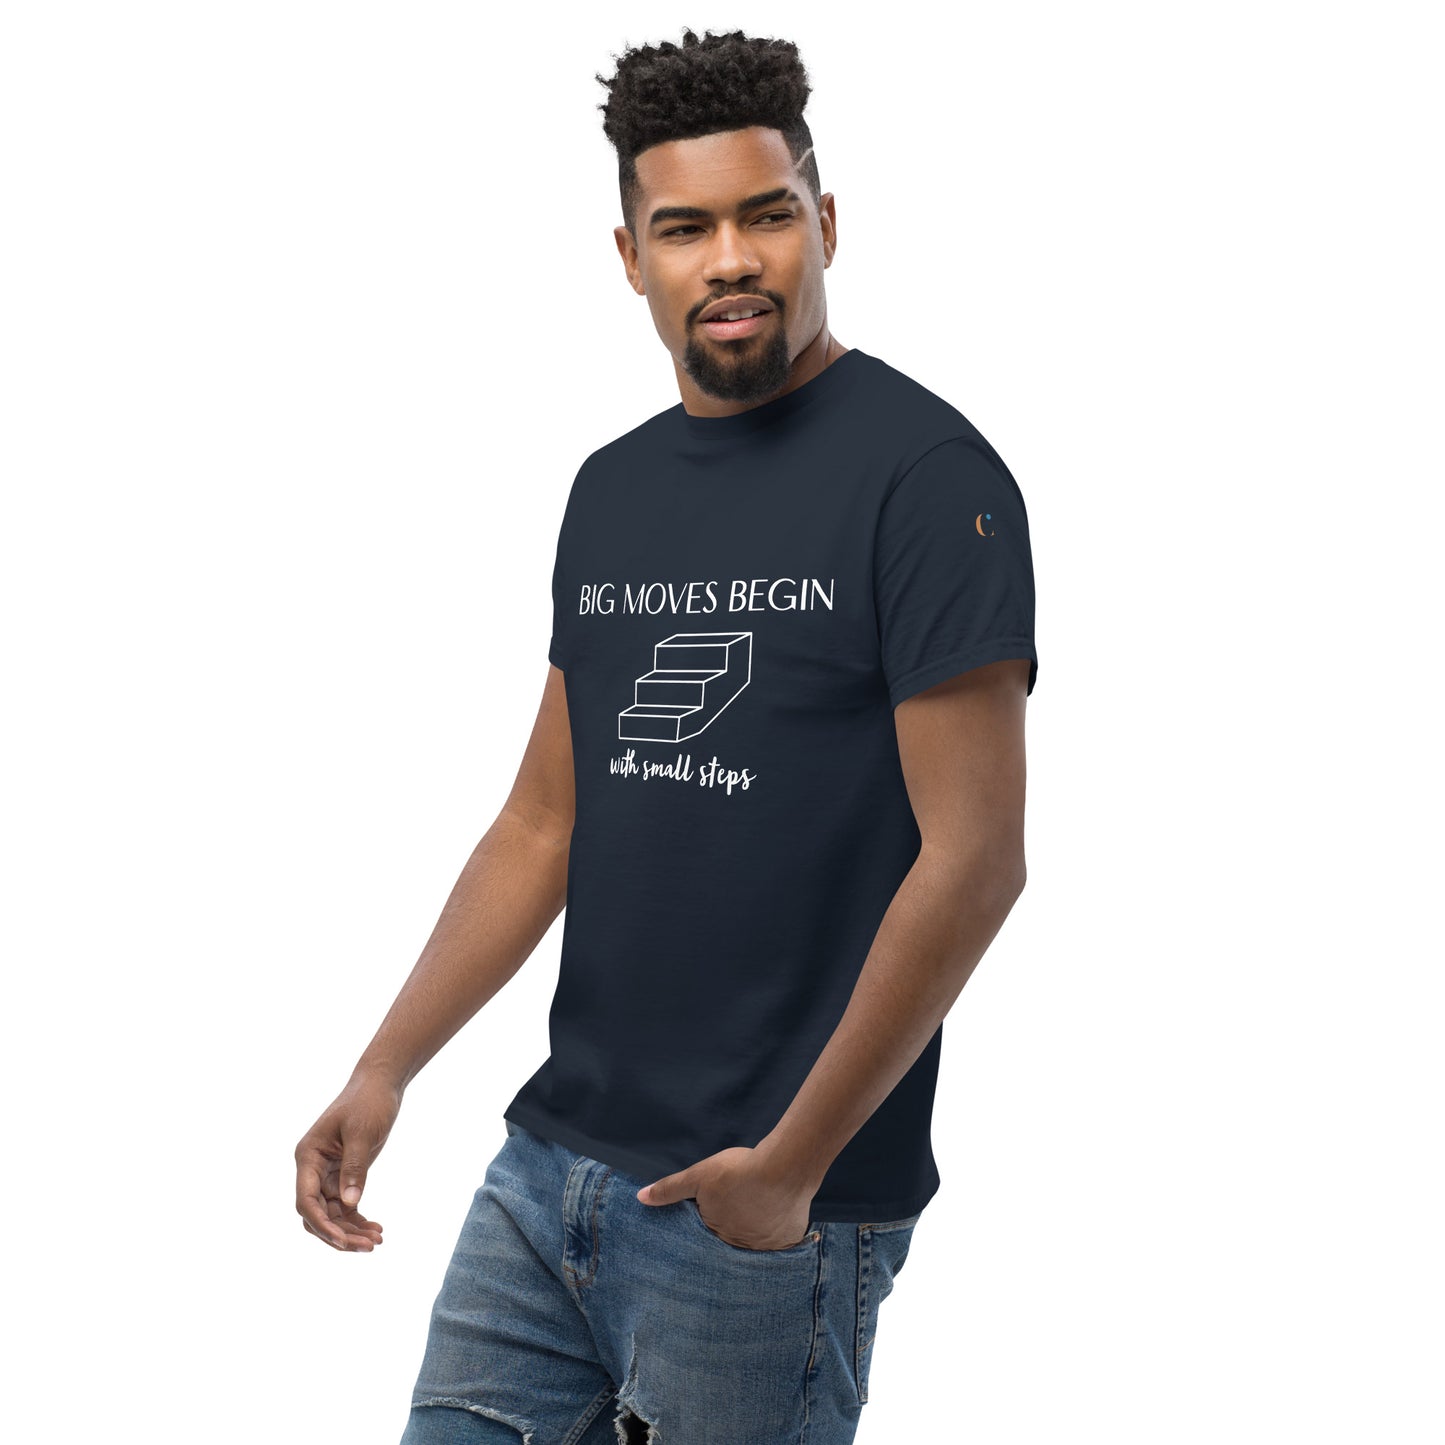 "Small Steps" Men's classic tee